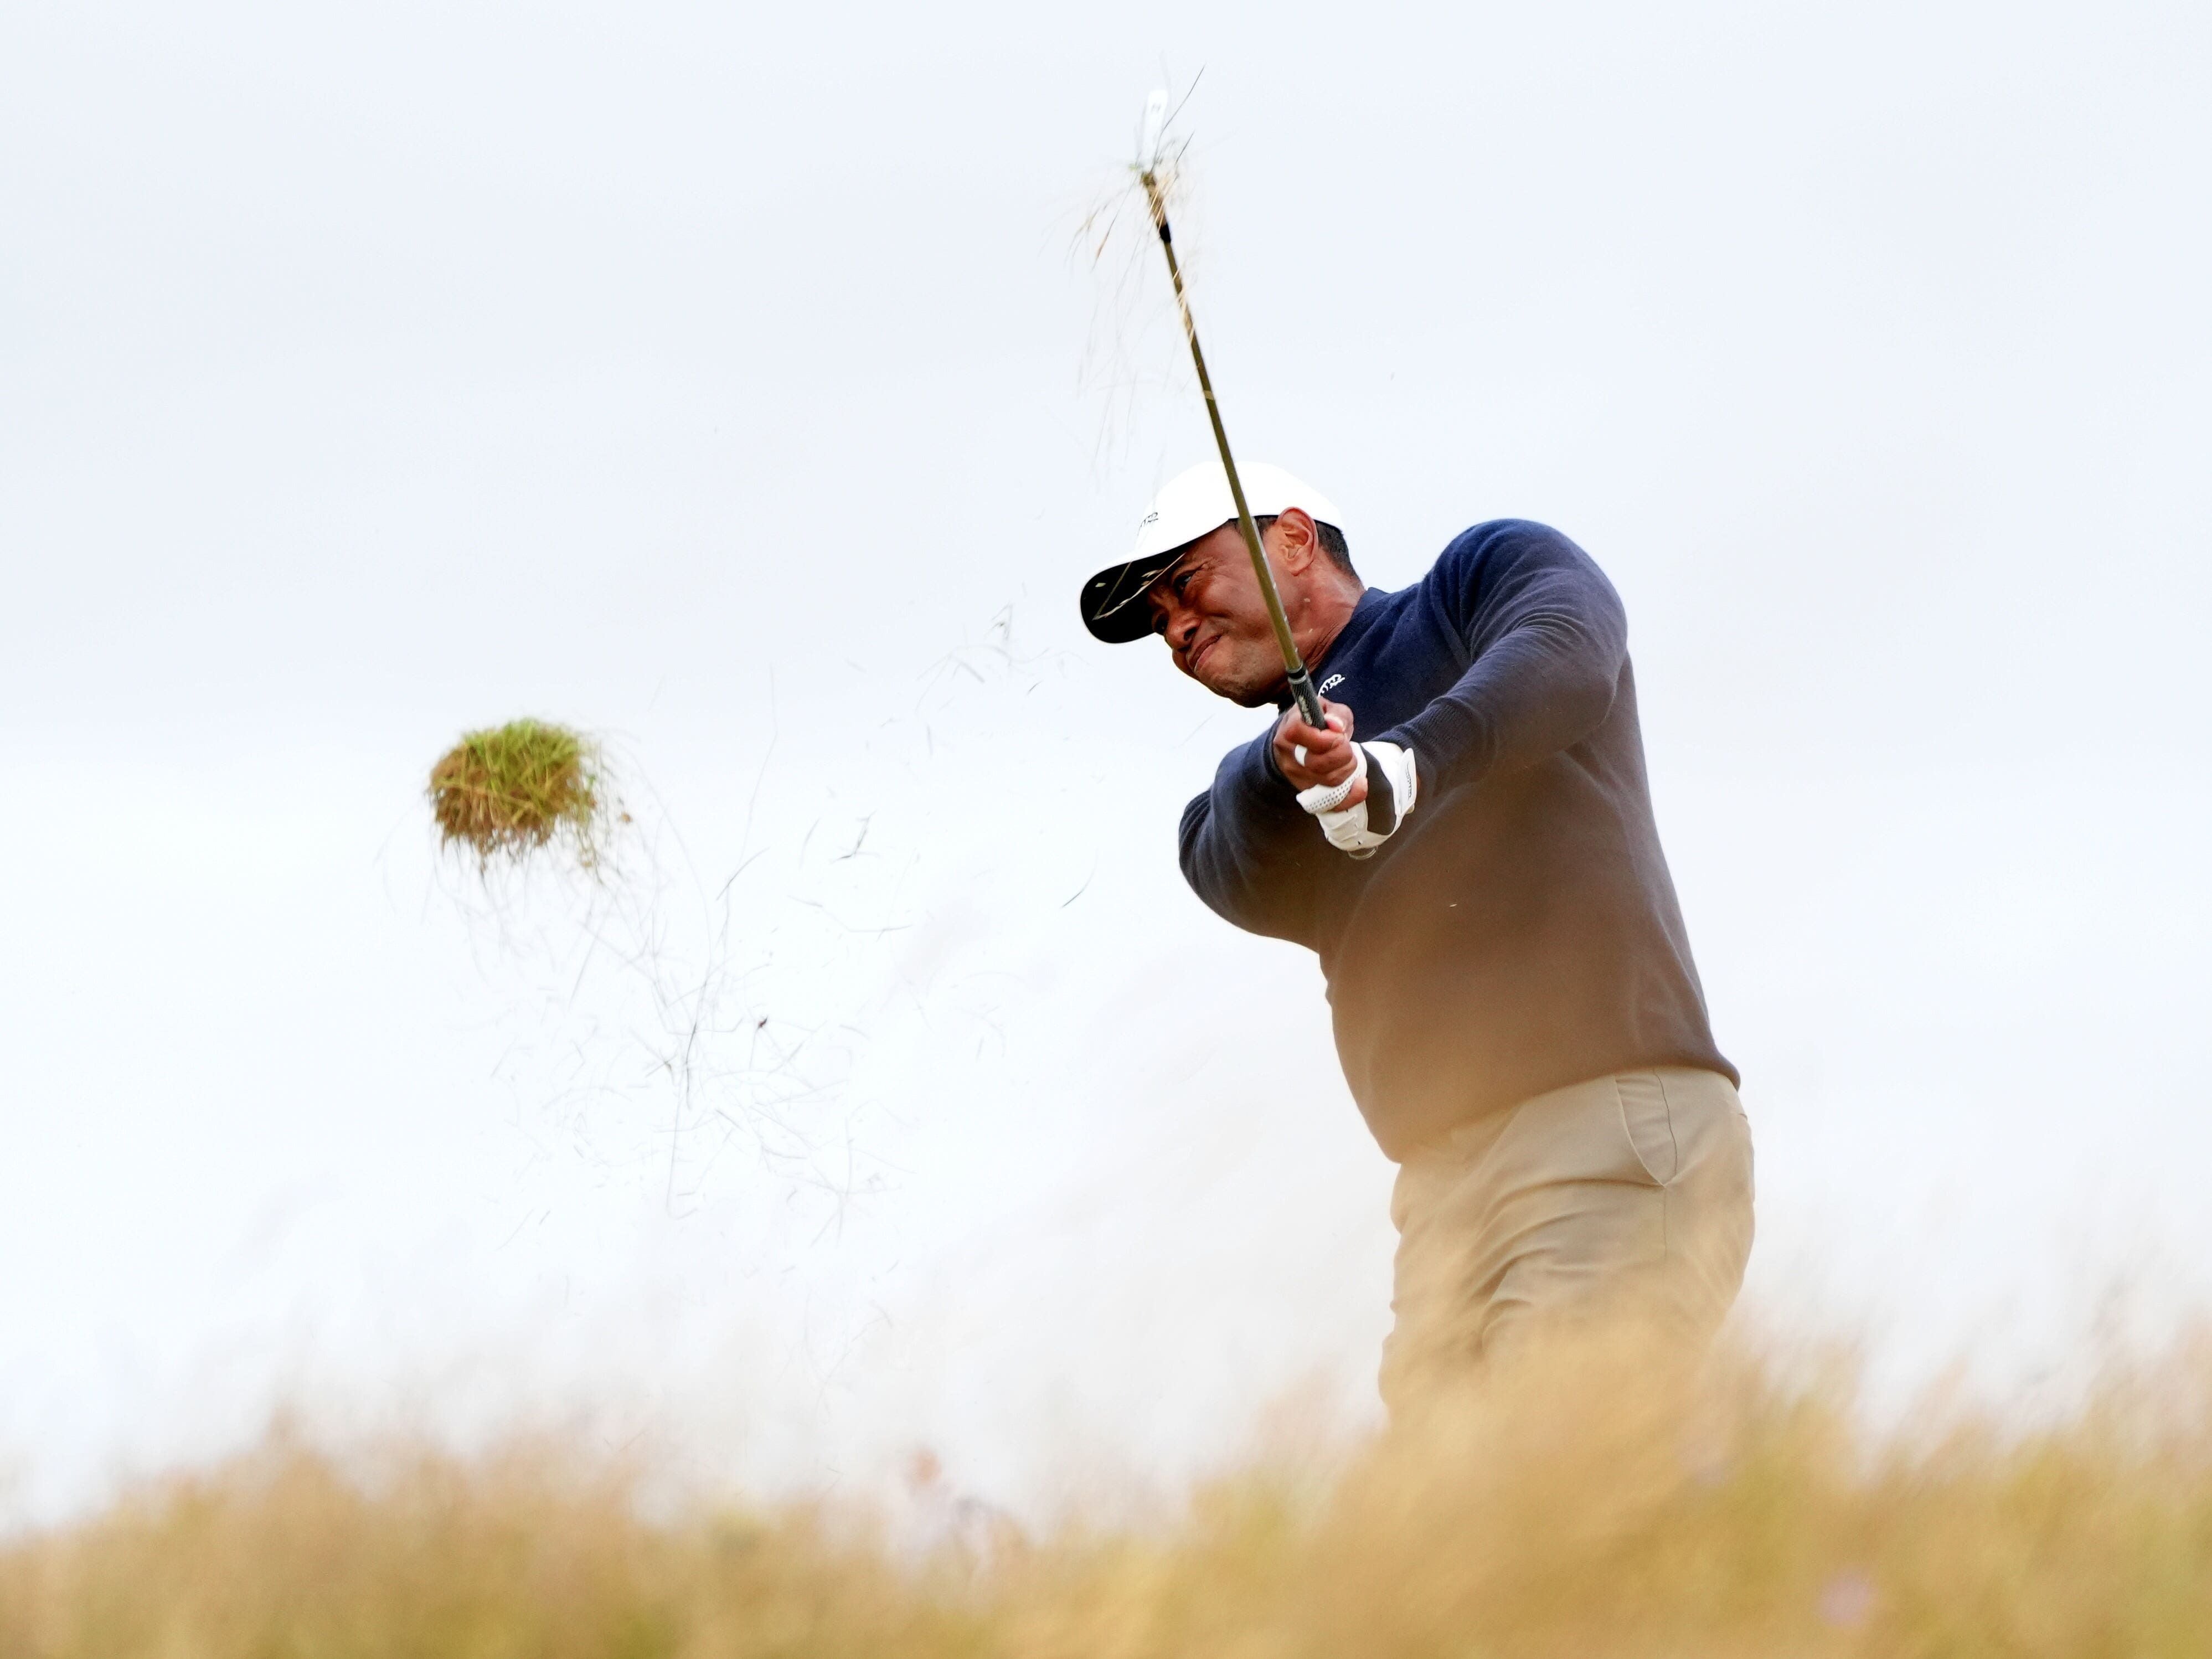 Tiger Woods set to miss cut at the Open as Shane Lowry continues eventful charge